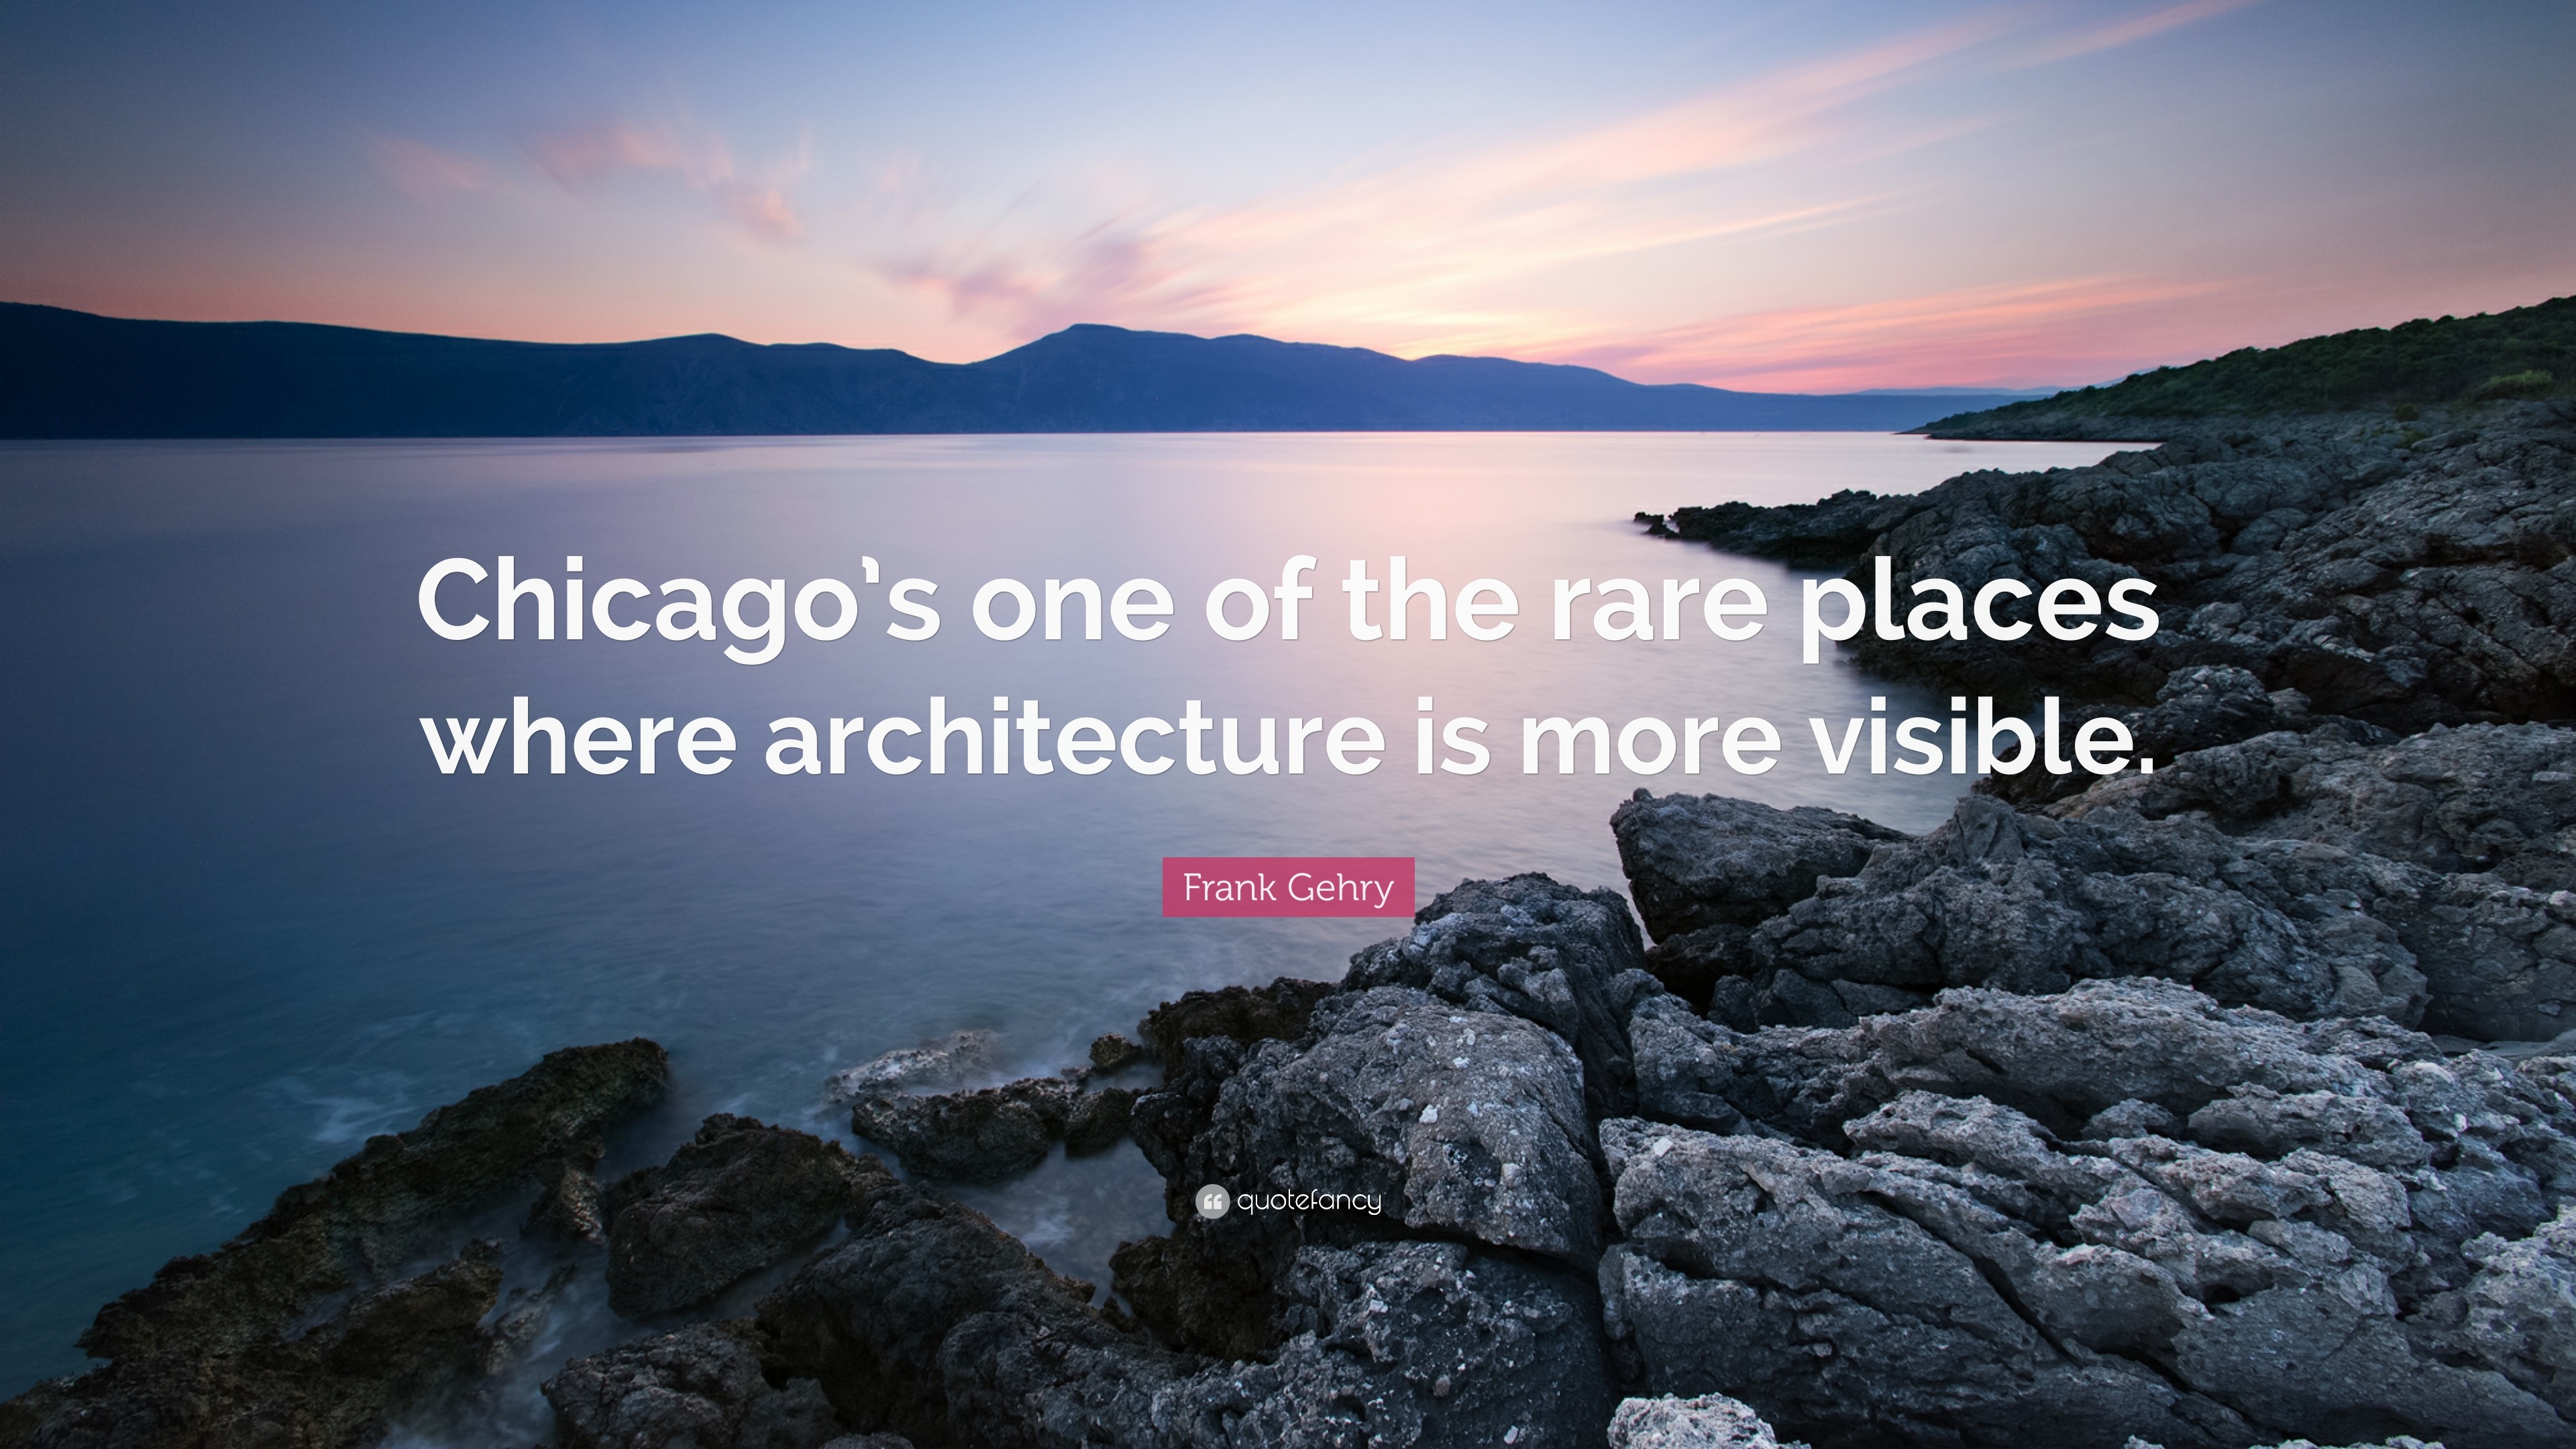 Frank Gehry's Words of Wisdom